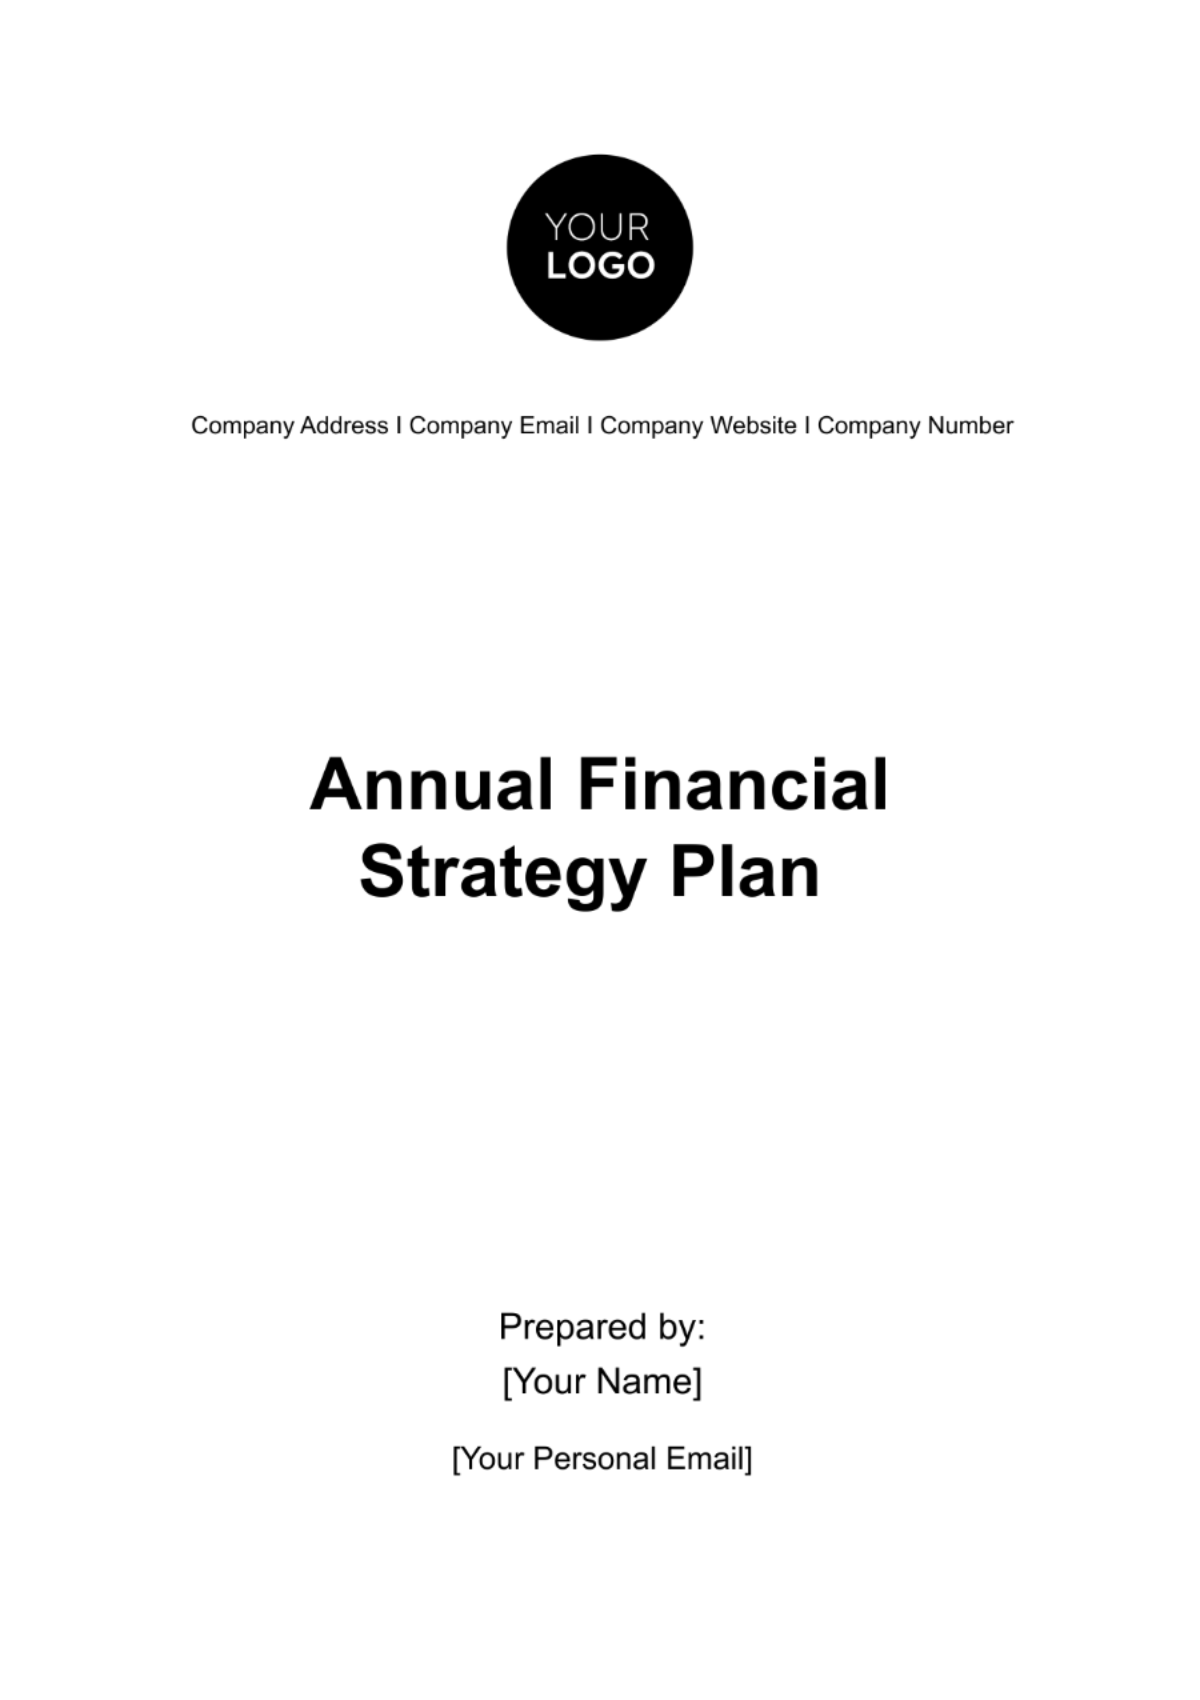 Annual Financial Strategy Plan Template